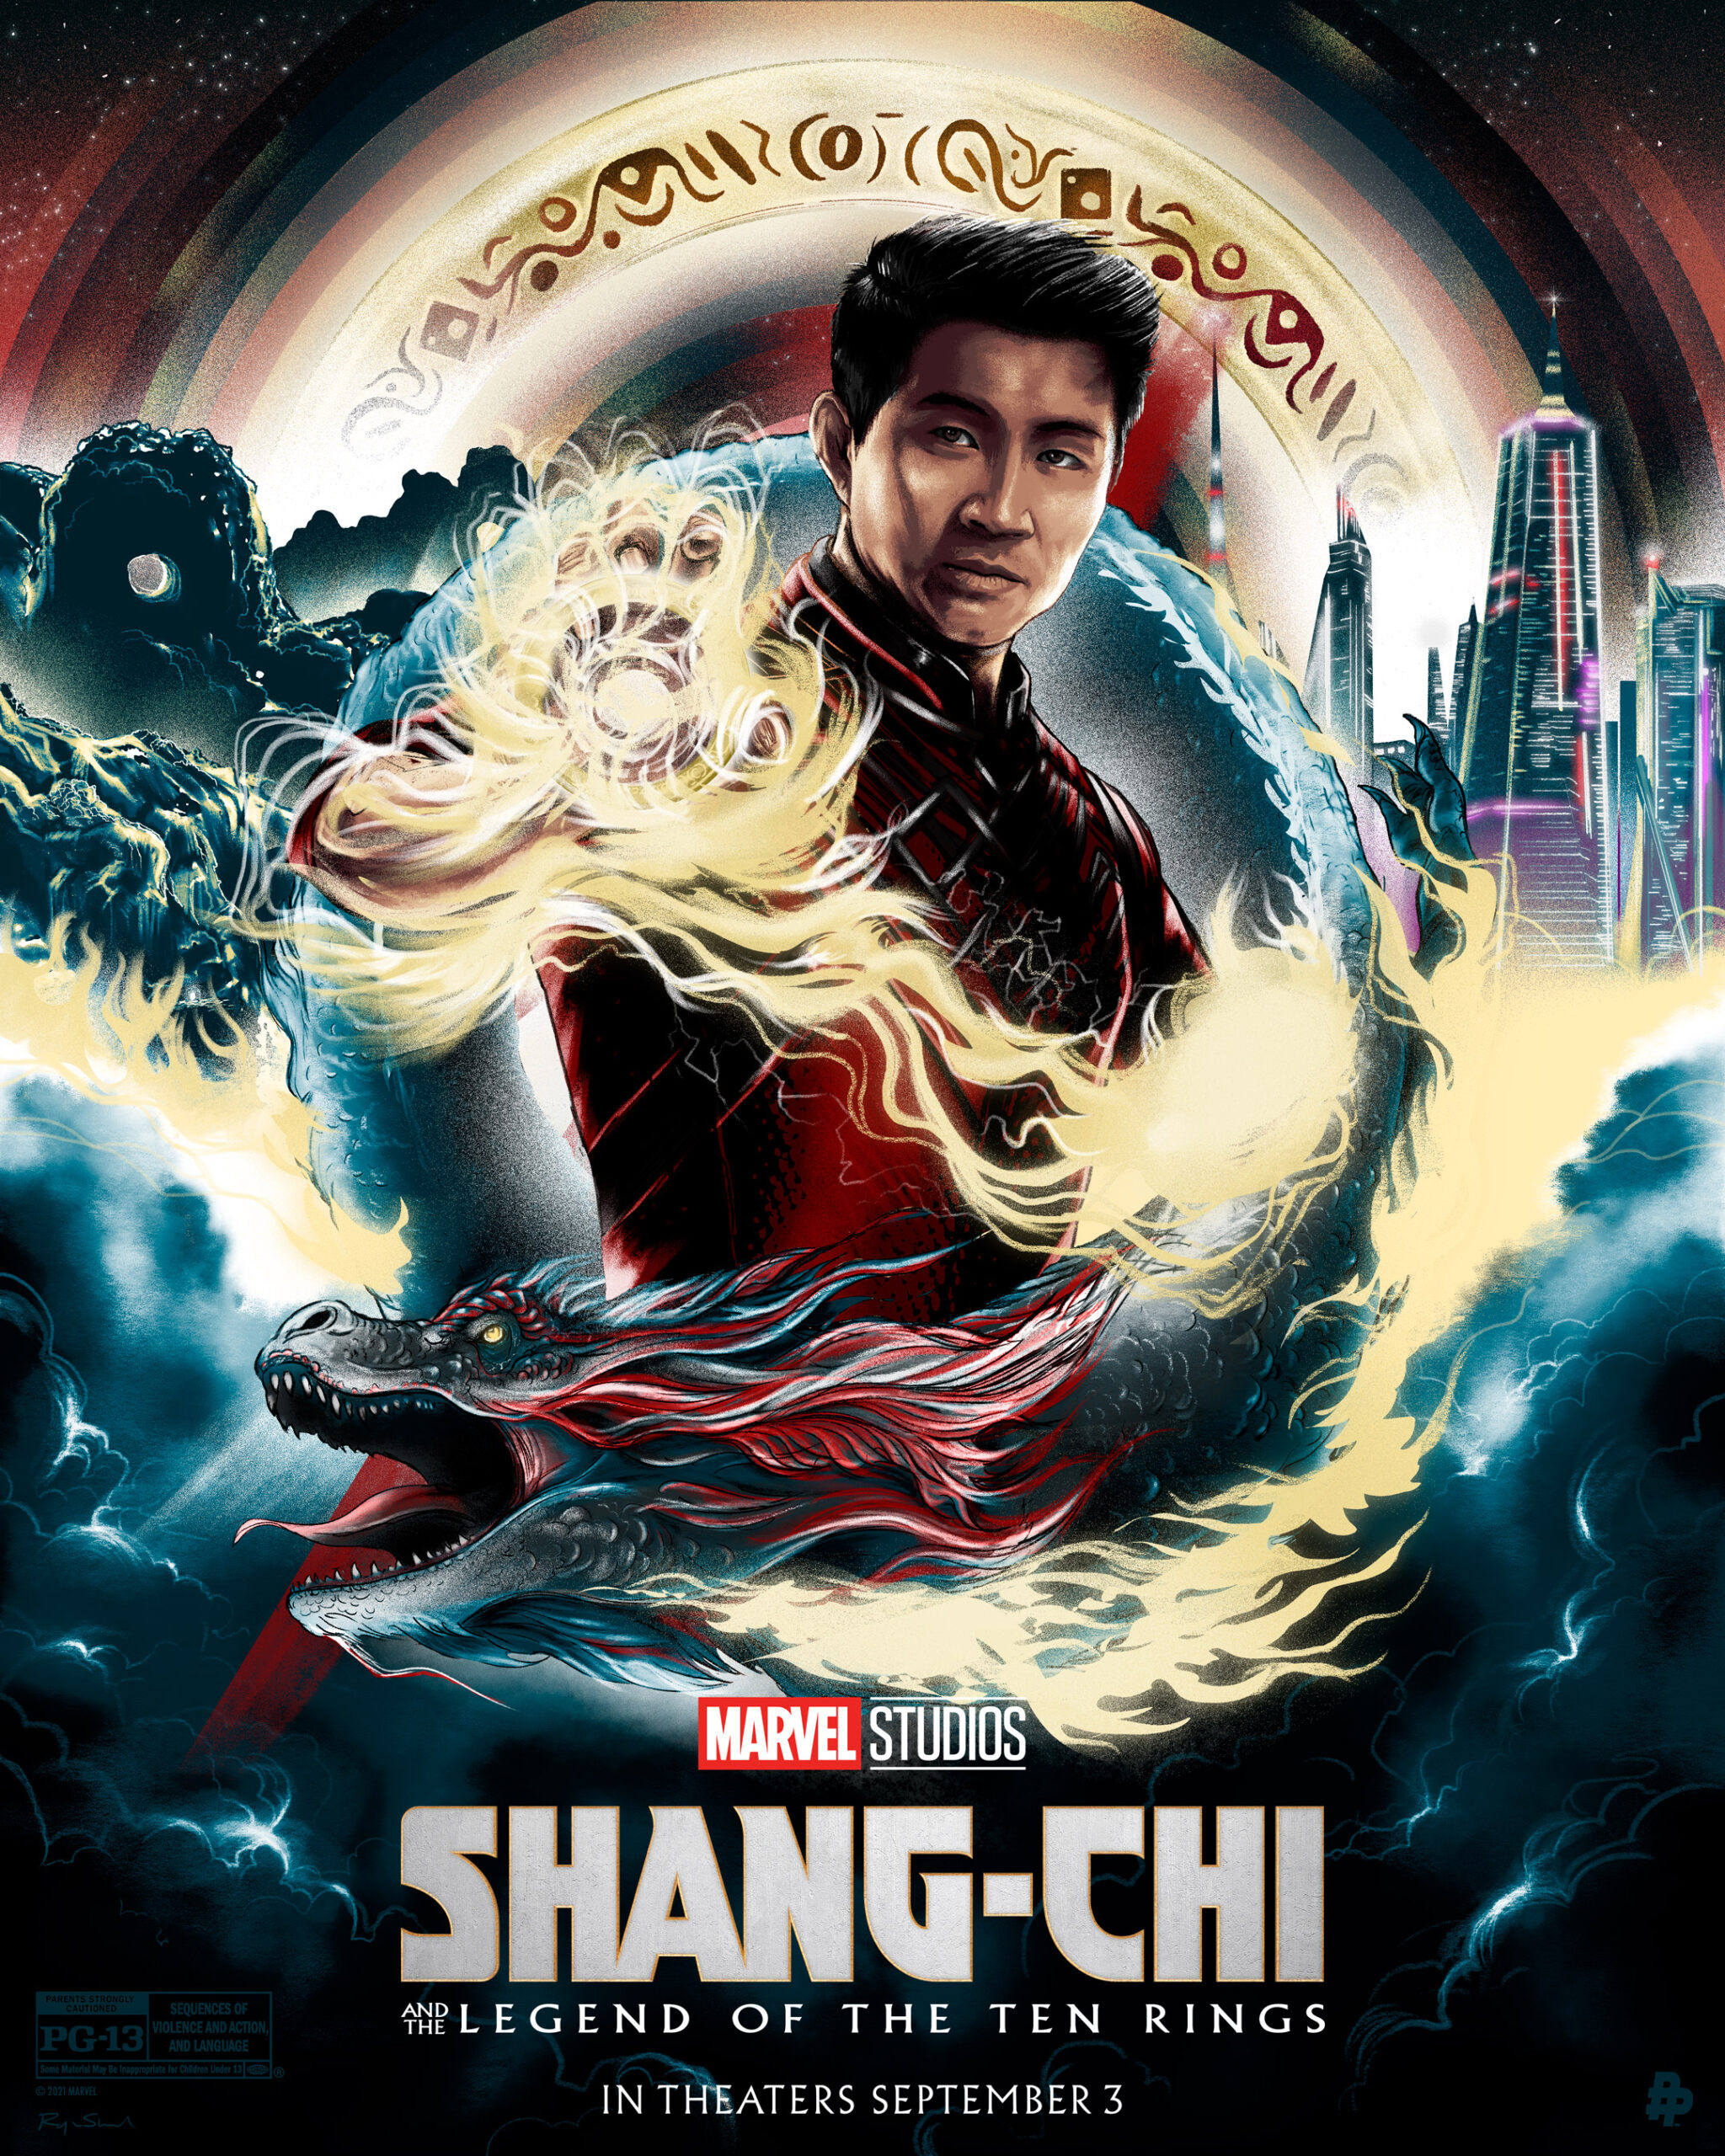 Artwork by Shang-Chi & The Legend of the Ten Rings – Digital Marketing